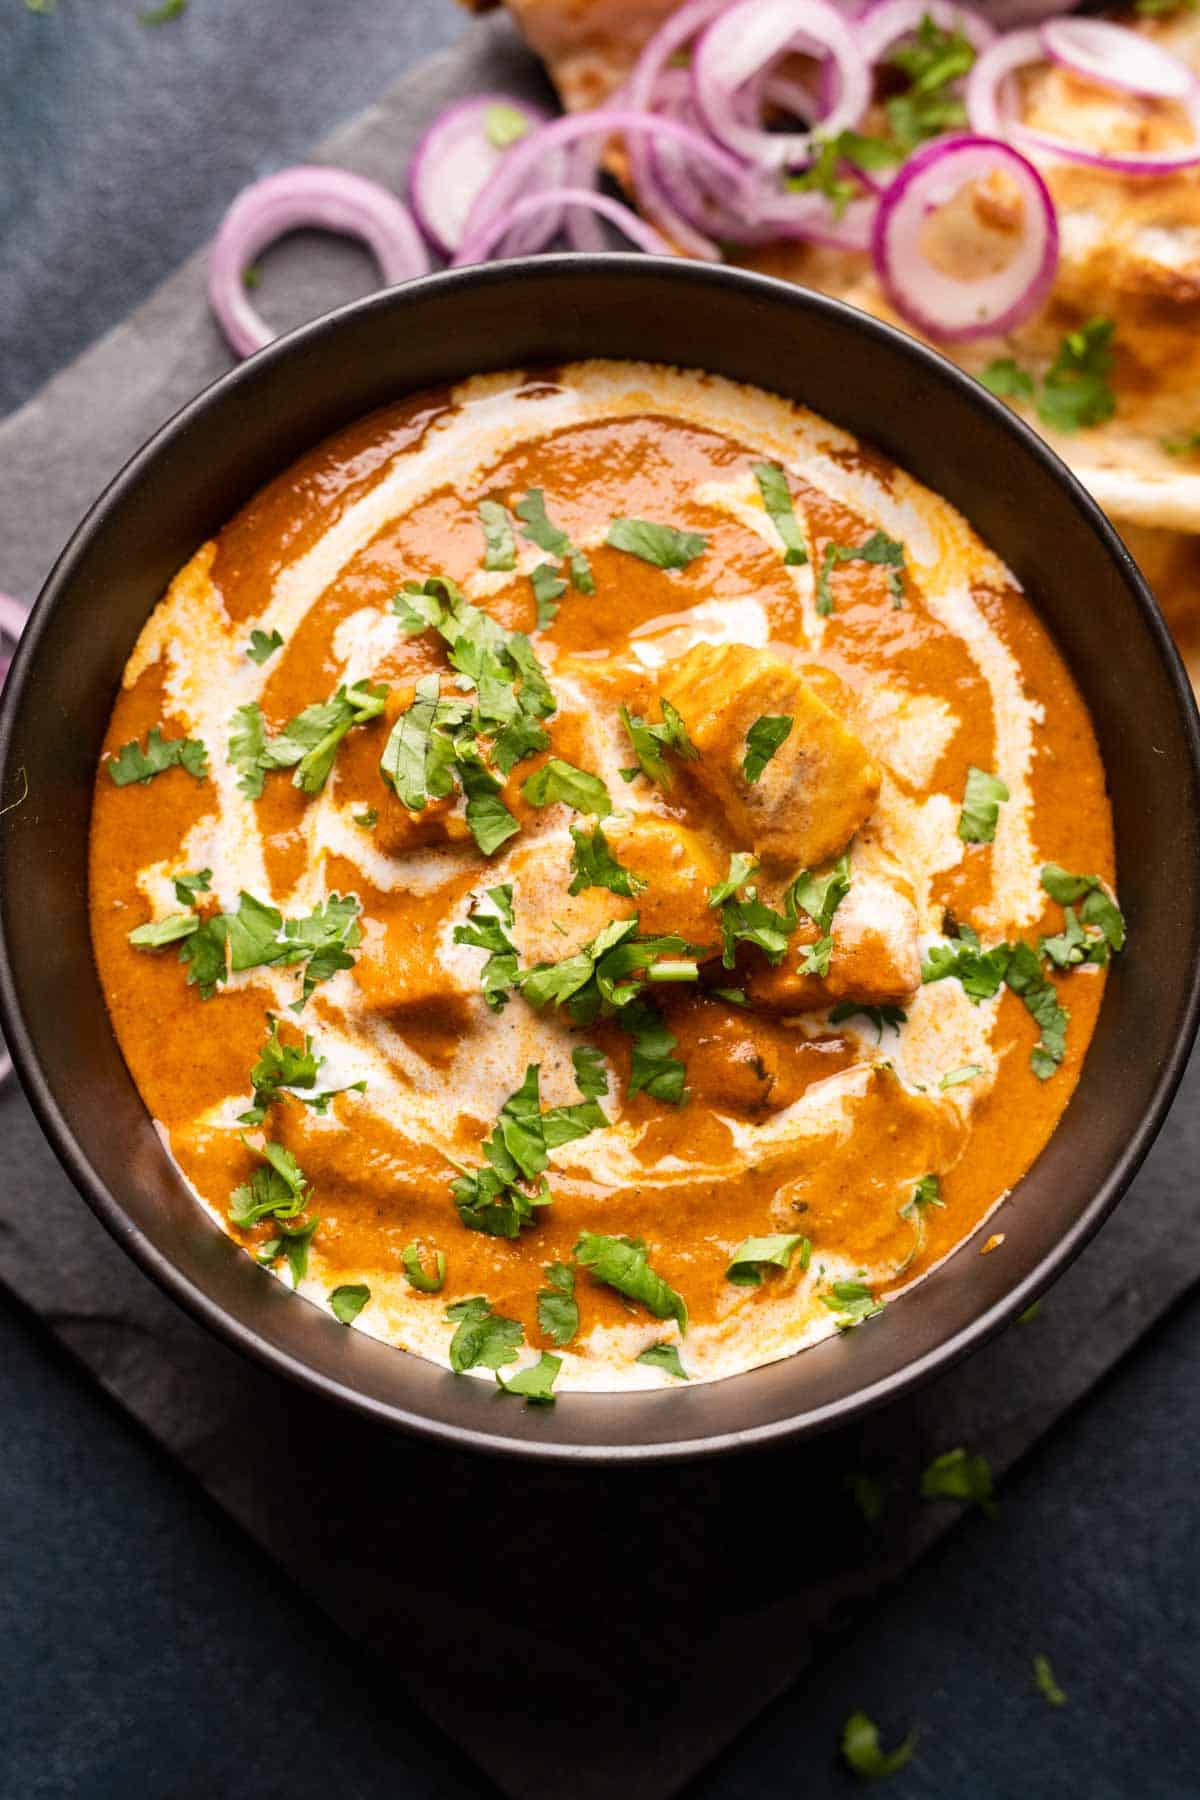 Picture of shahi paneer served in a black bowl with onions and naan on the side